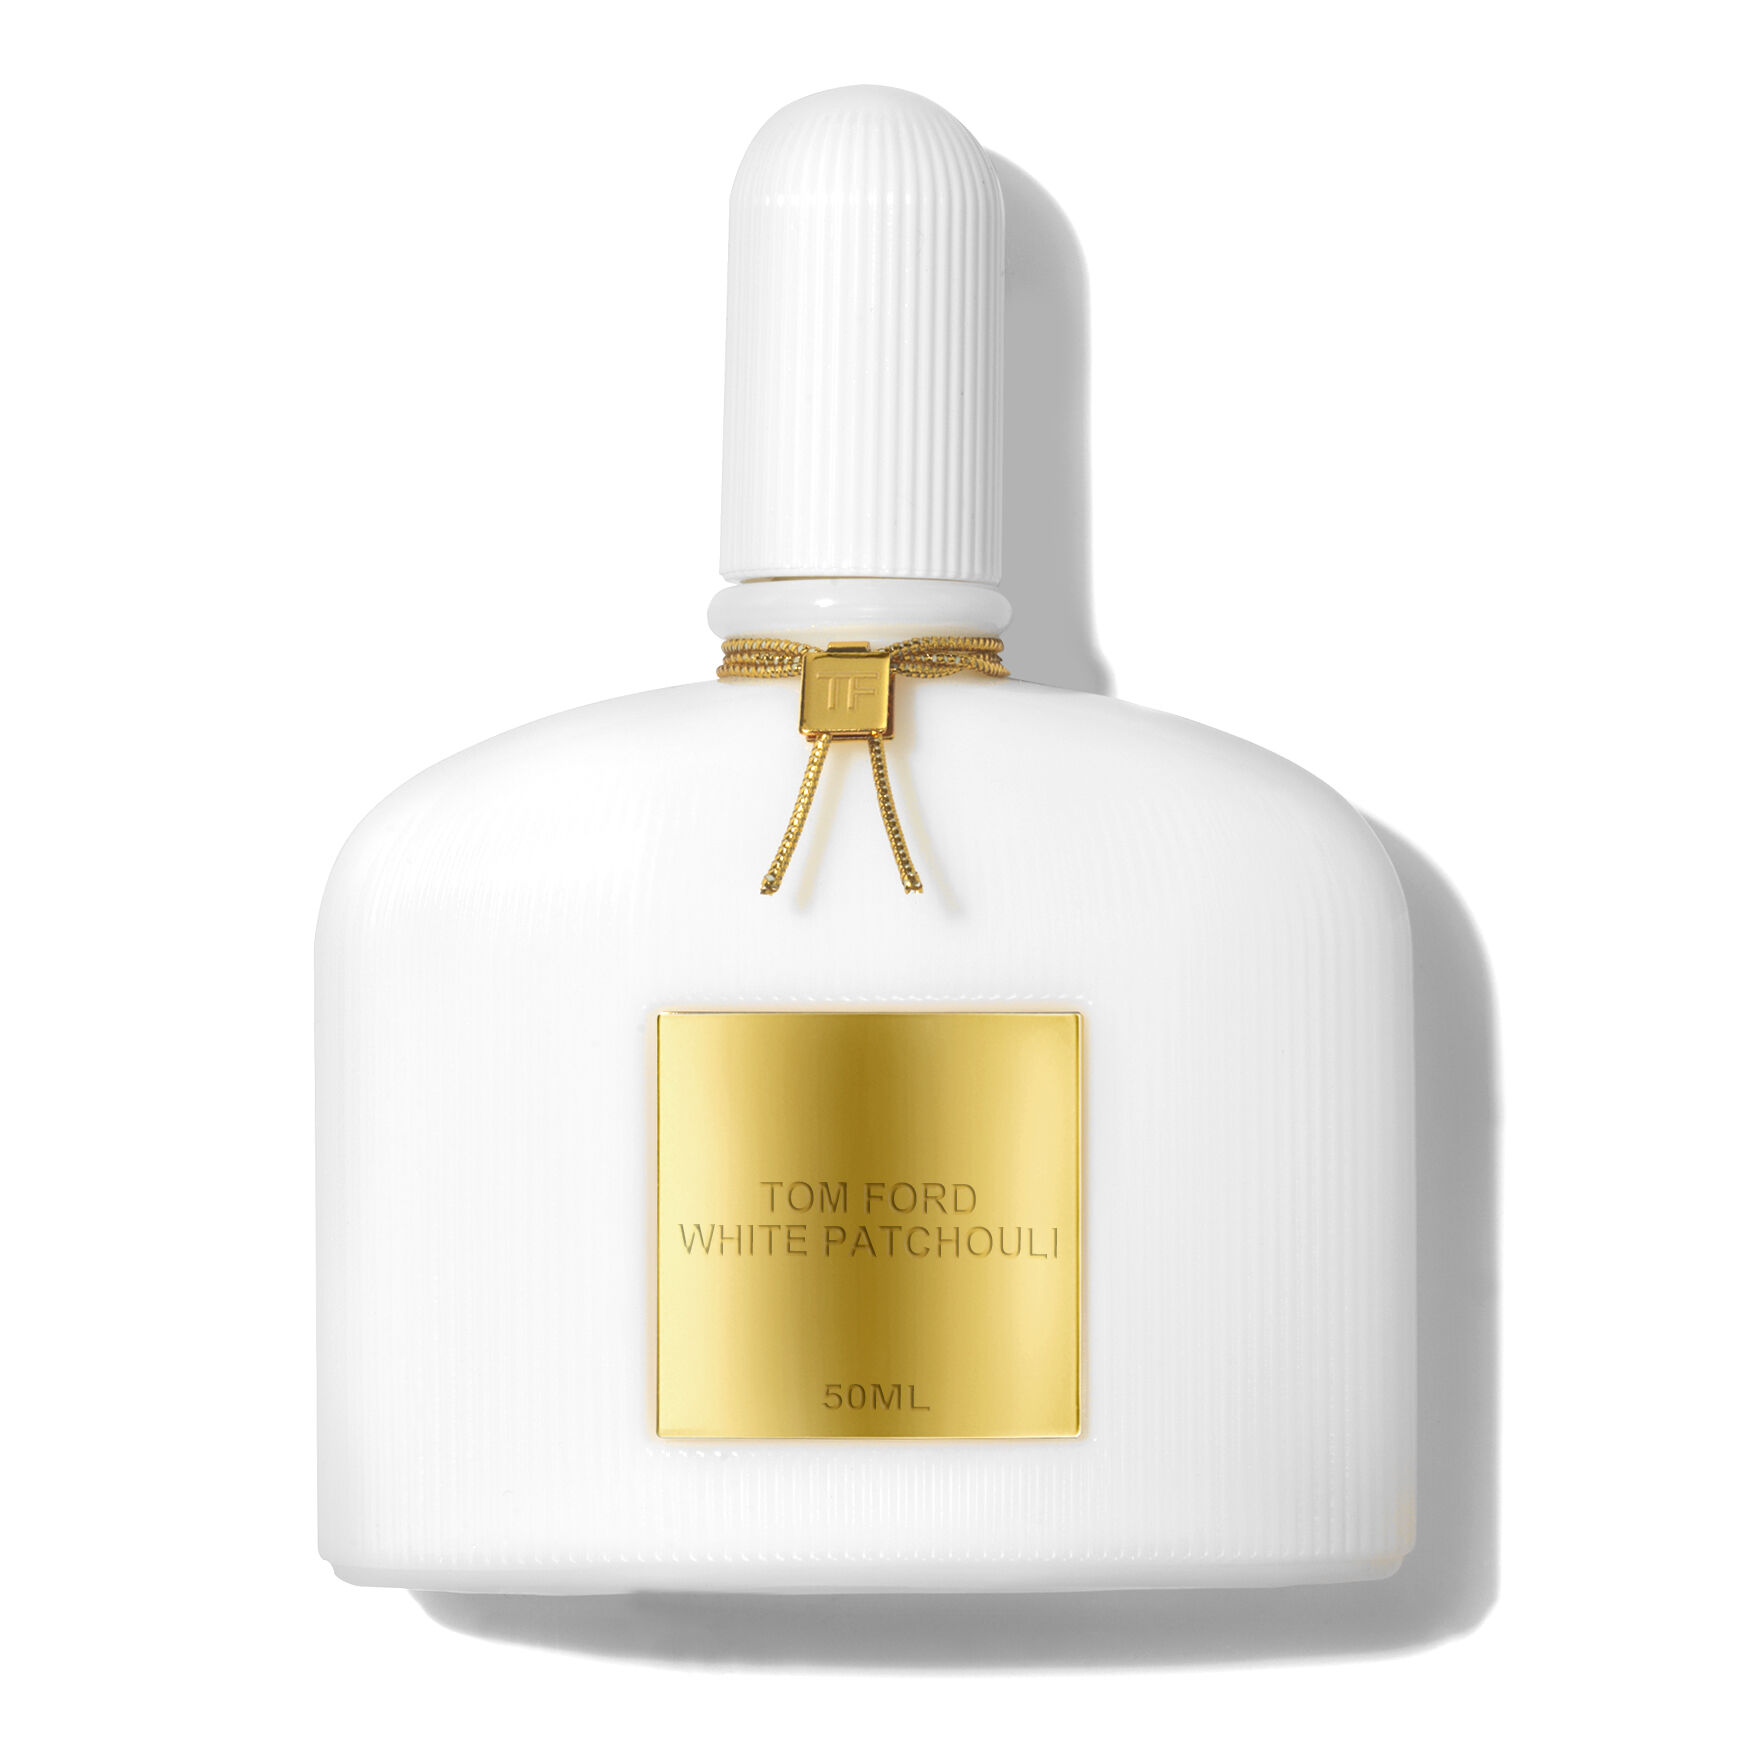 tom ford white patchouli notes